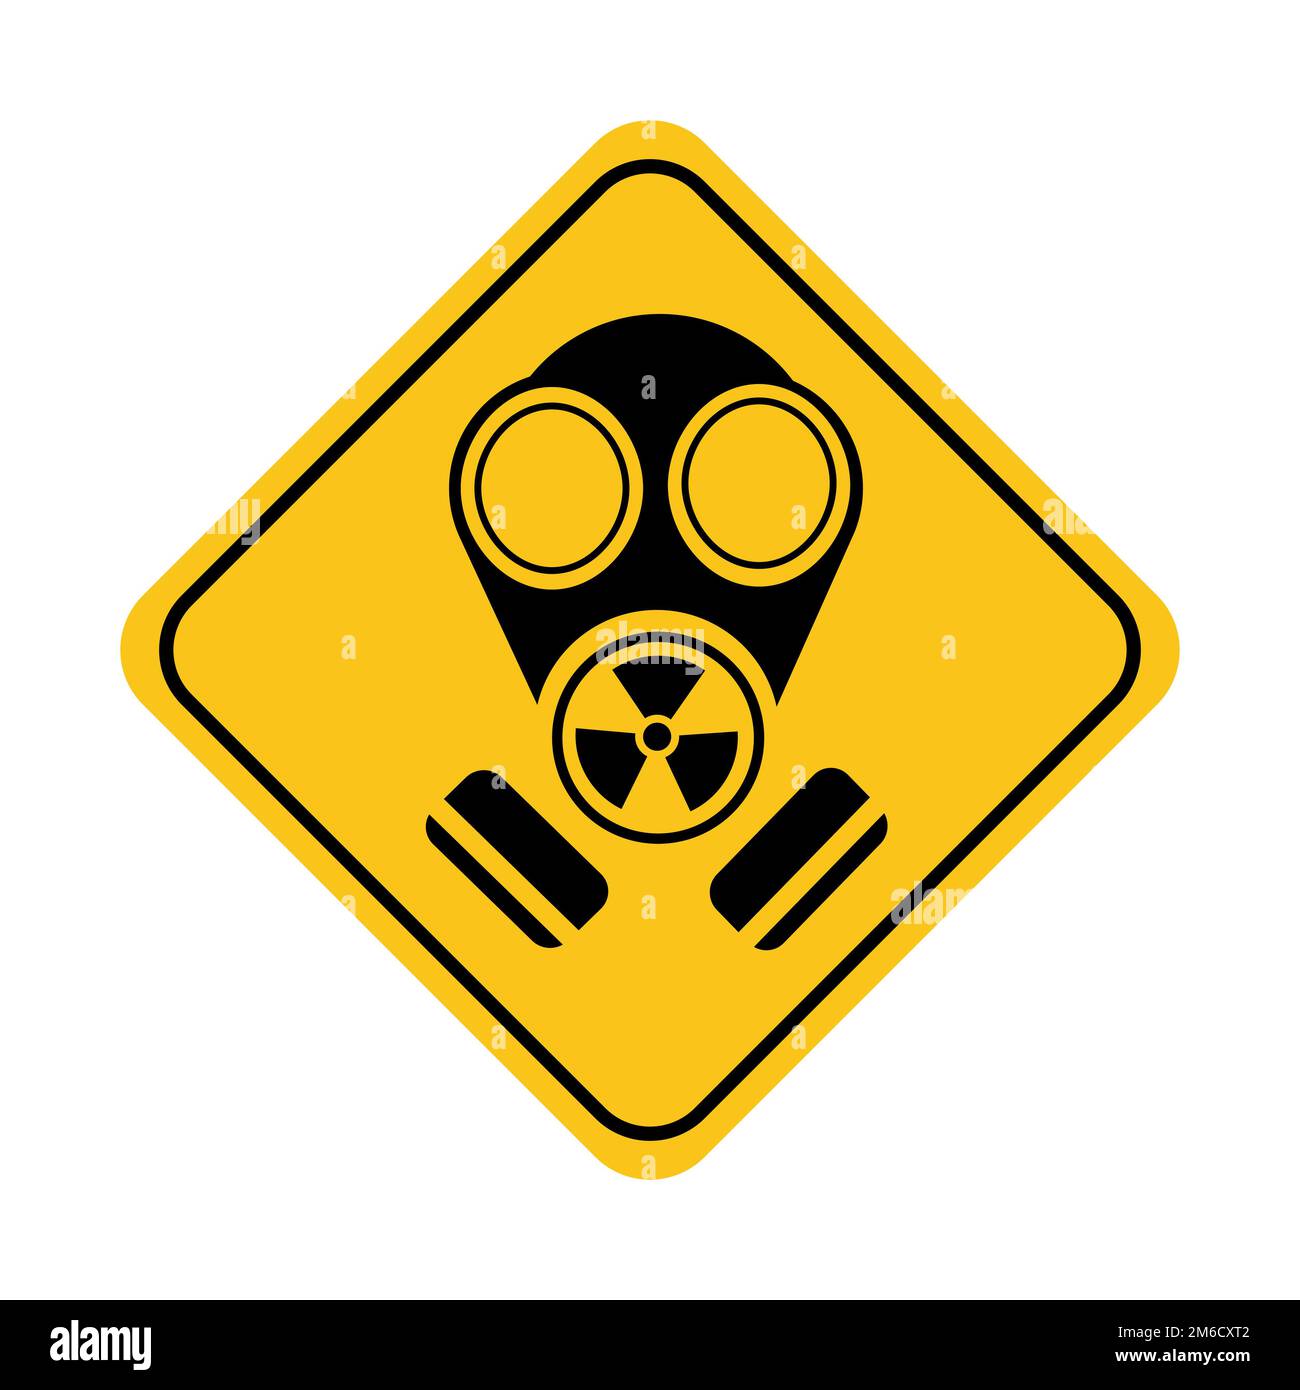 Simple drawing of a gas mask sign, warning of danger Stock Photo